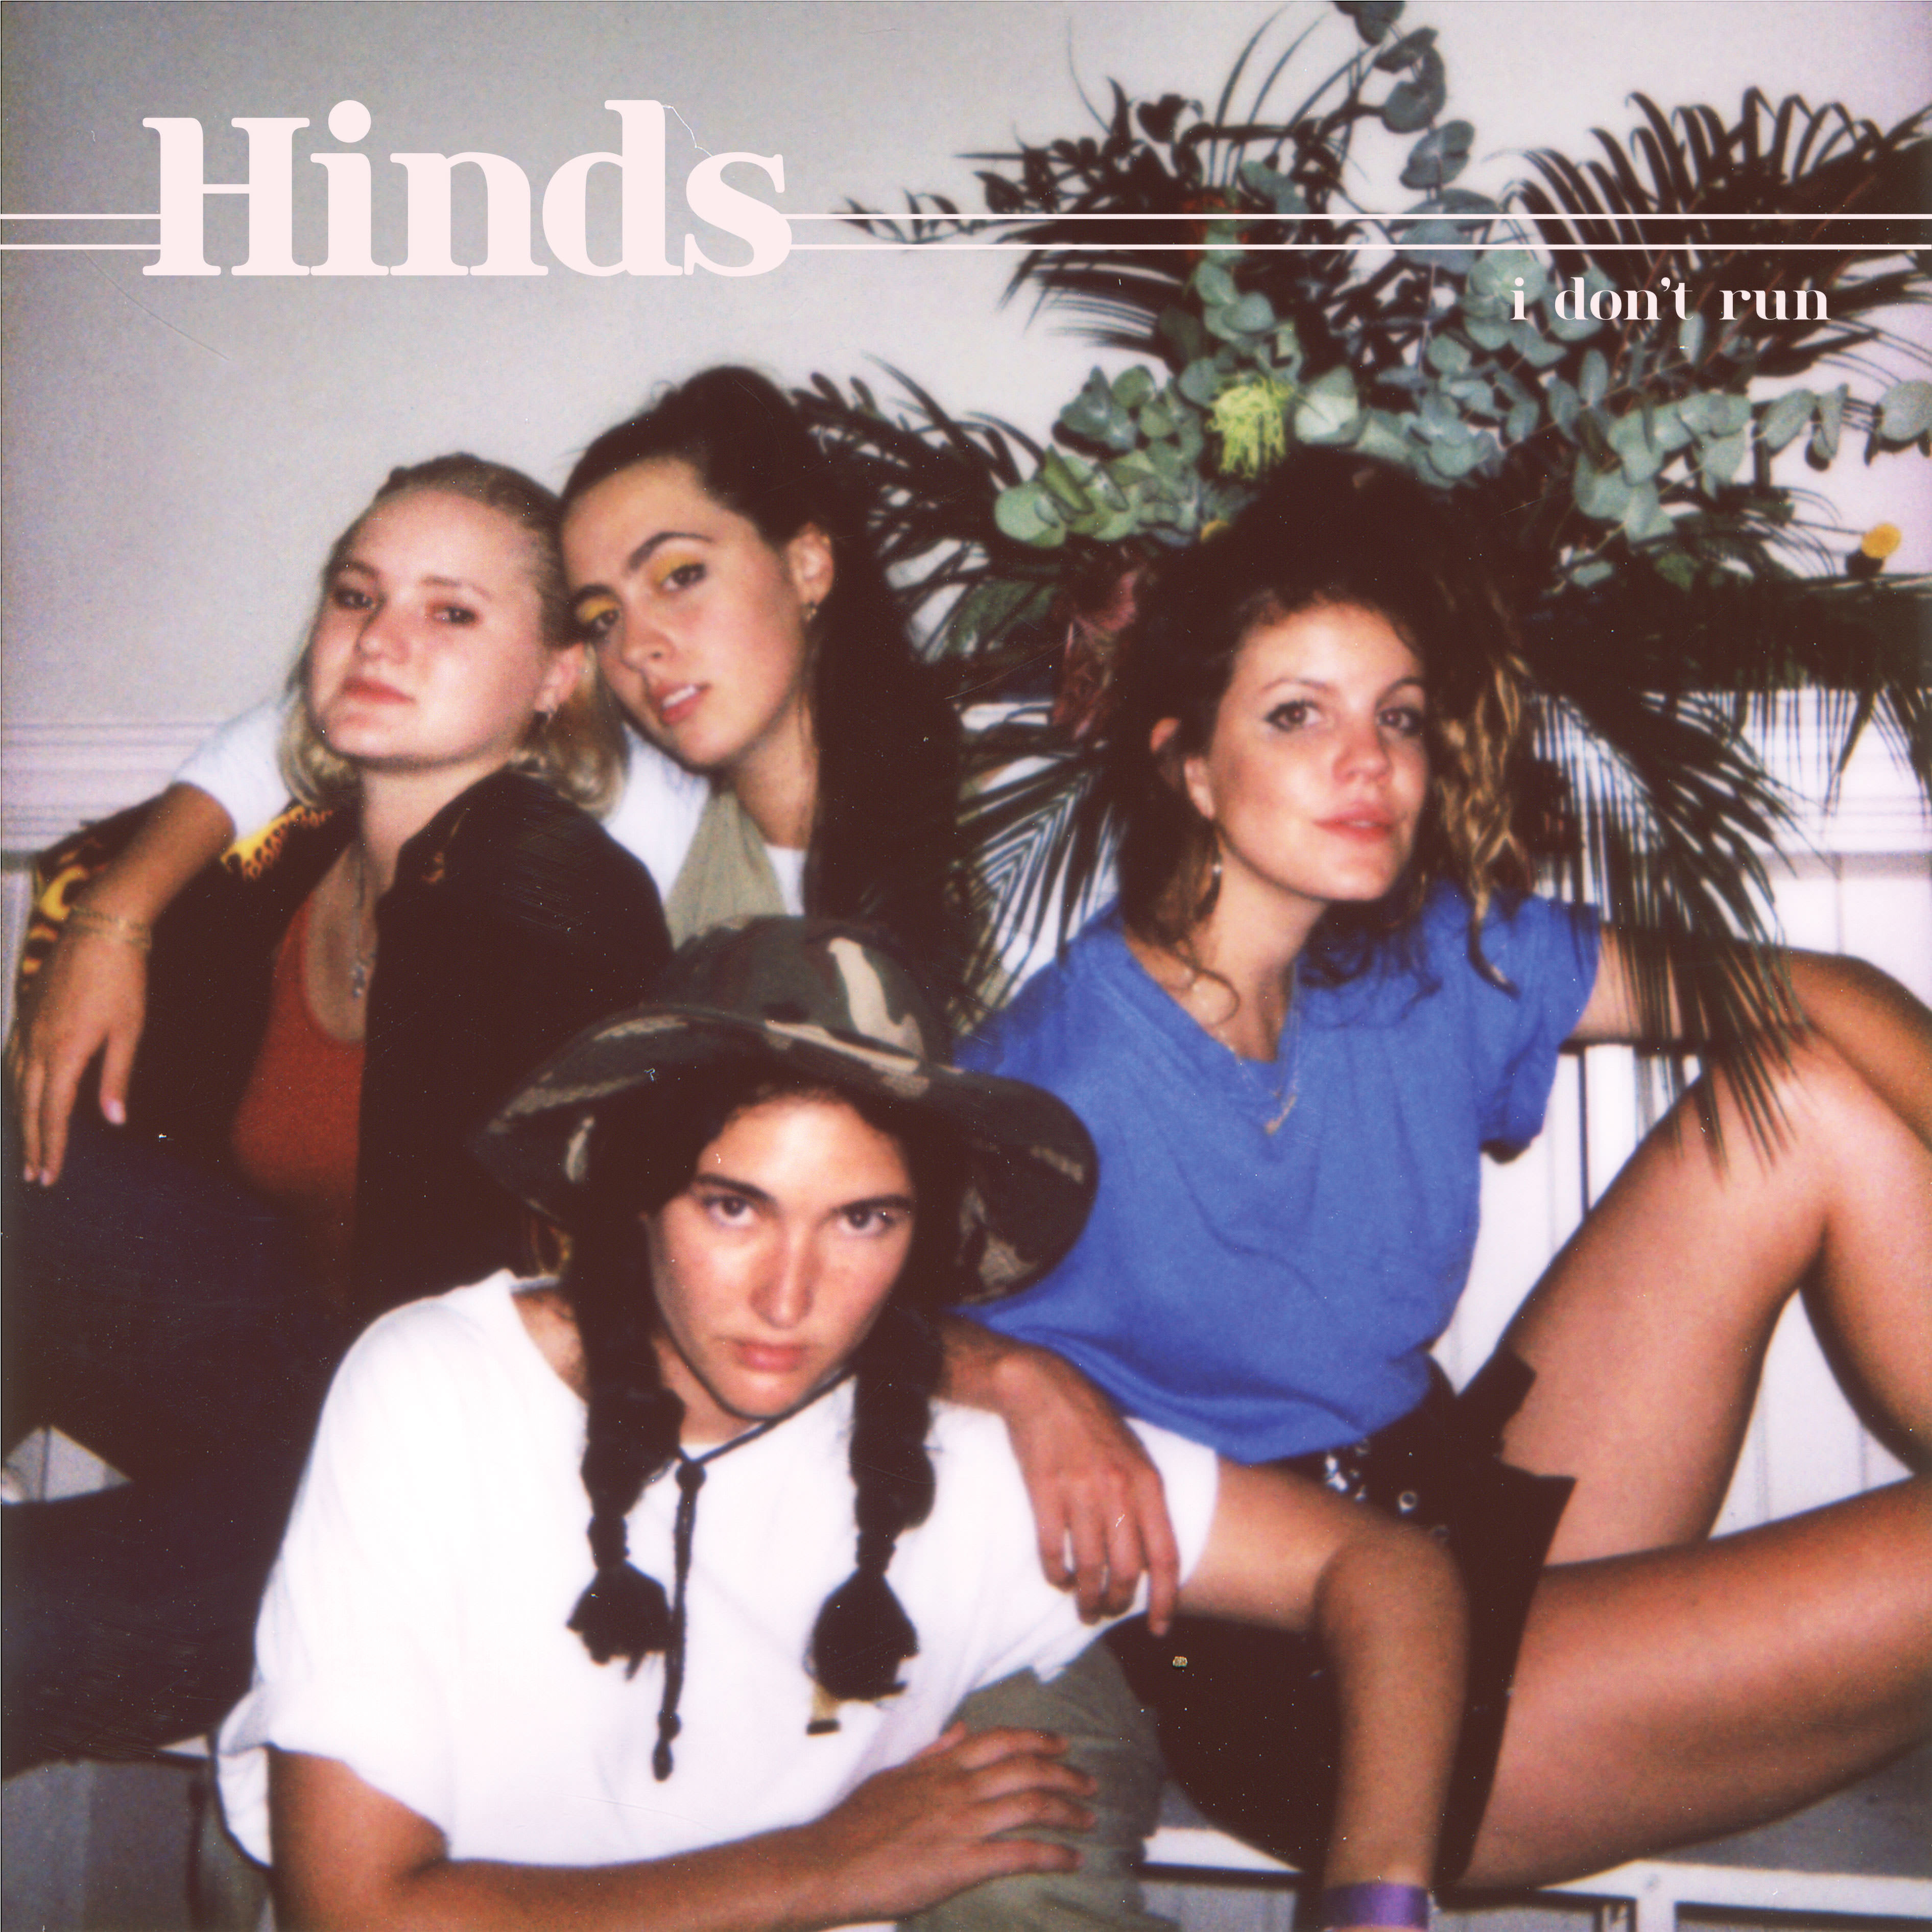 Hinds announce new album 'We Don't Run'